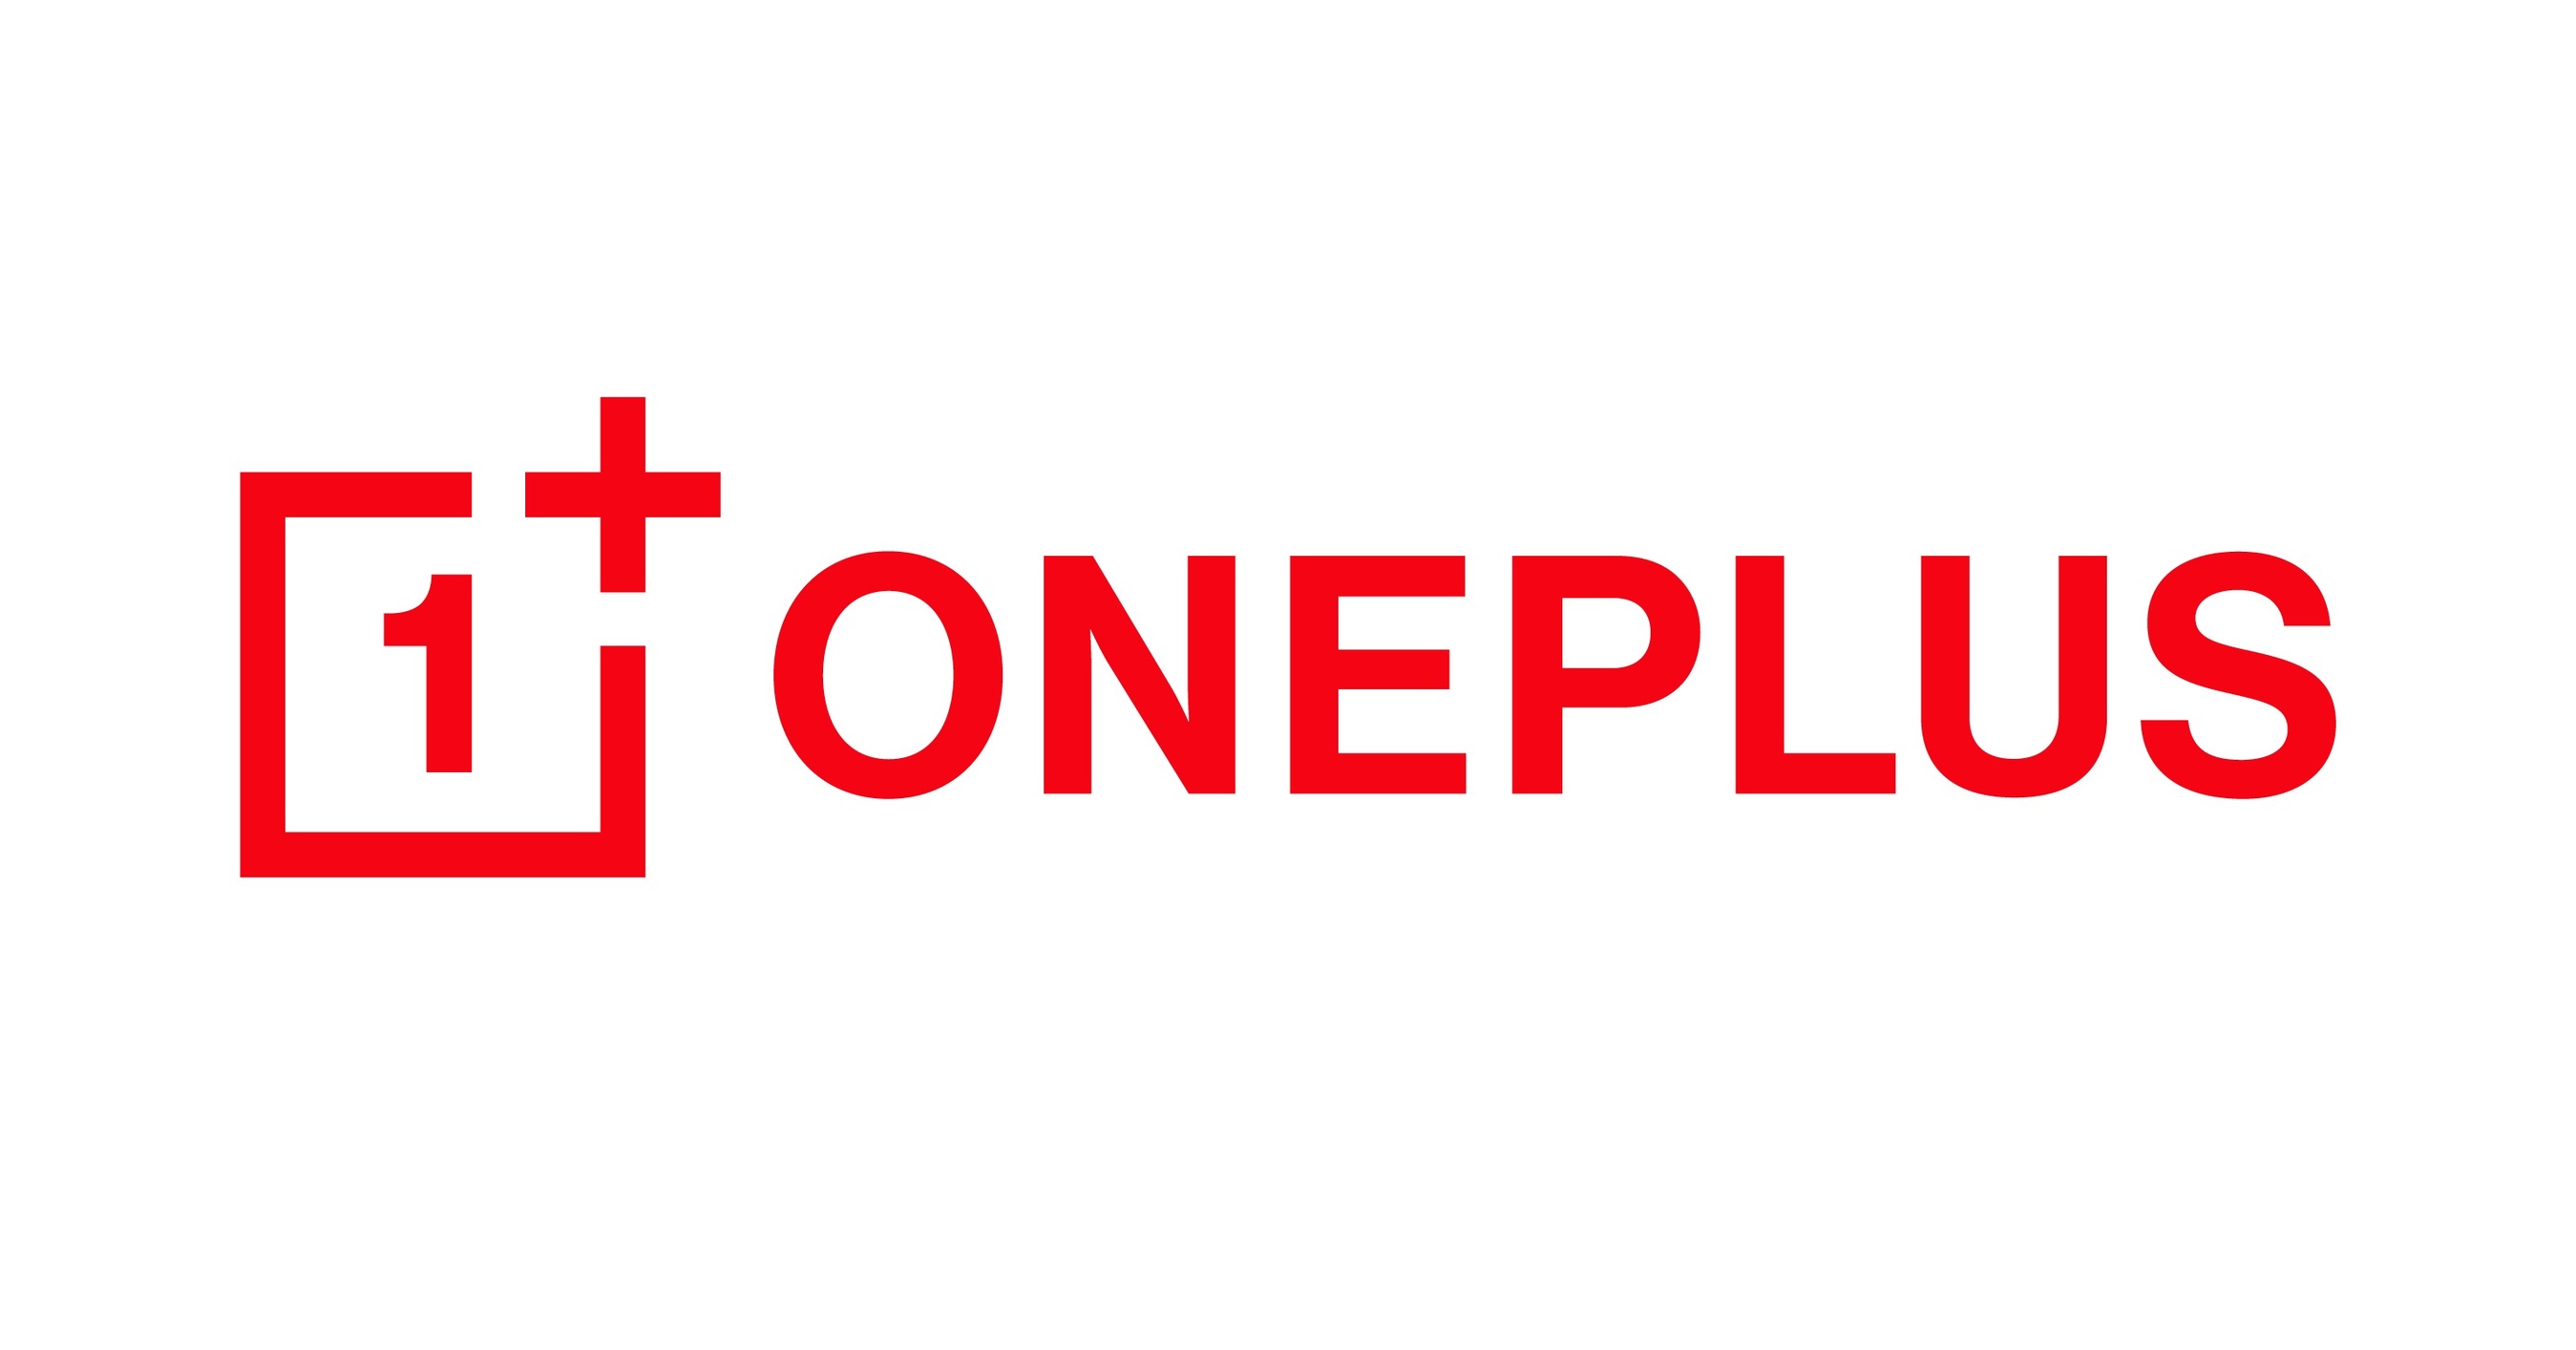 OnePlus just teased the OnePlus 12, and it looks incredible